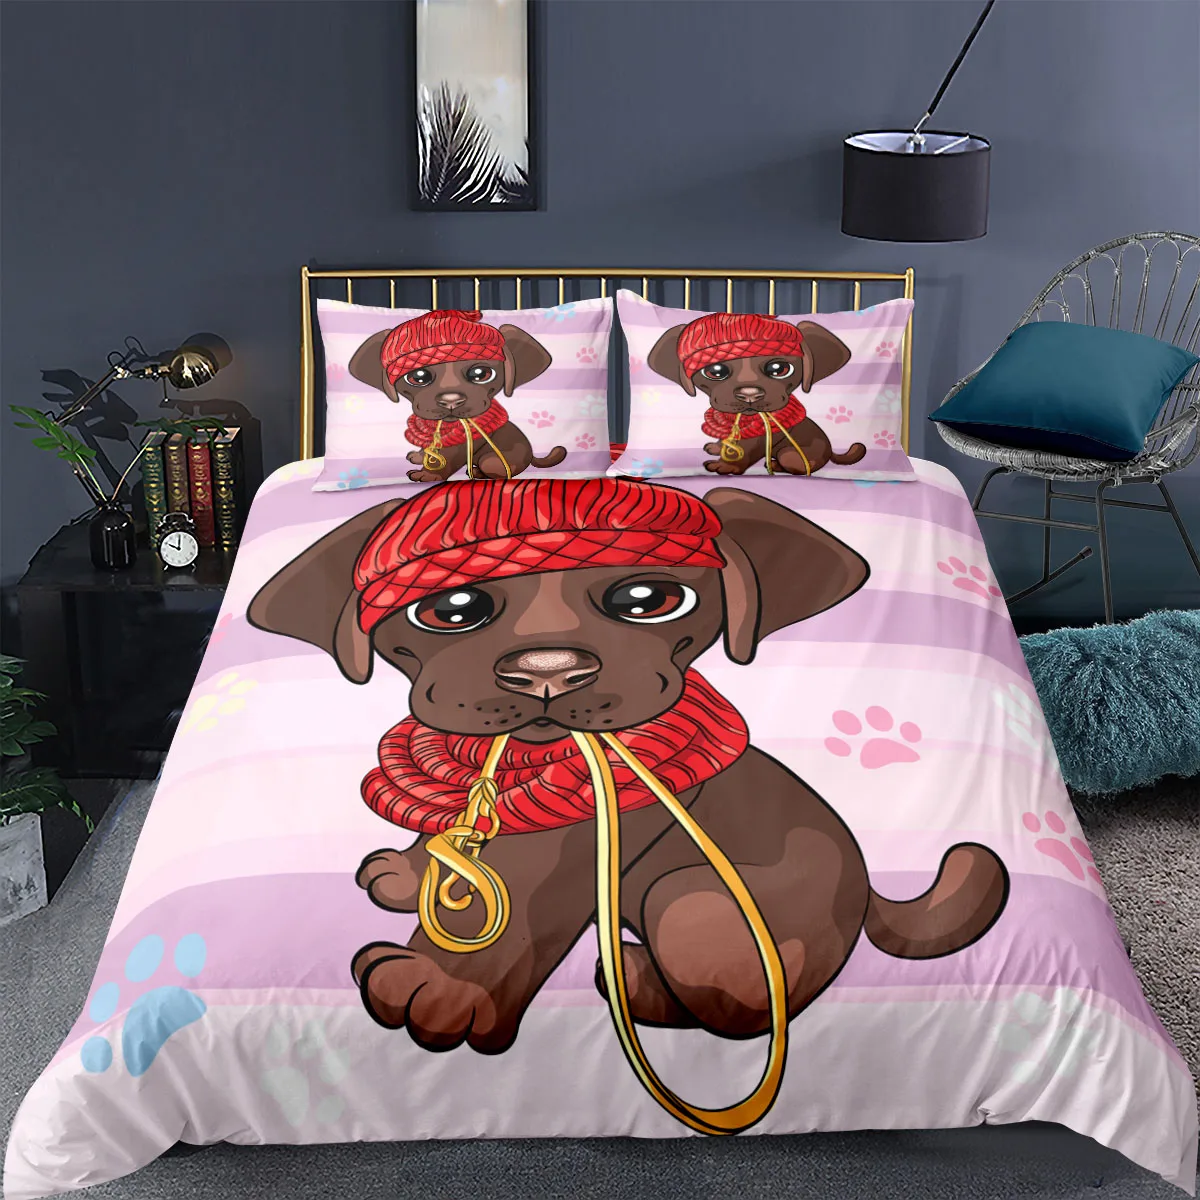 

Cartoon Dog Duvet Cover Set Single King Queen King Size Kids Cute Animal Bed Set Pink Bedclothes 220x240 200x200 Quilt Covers